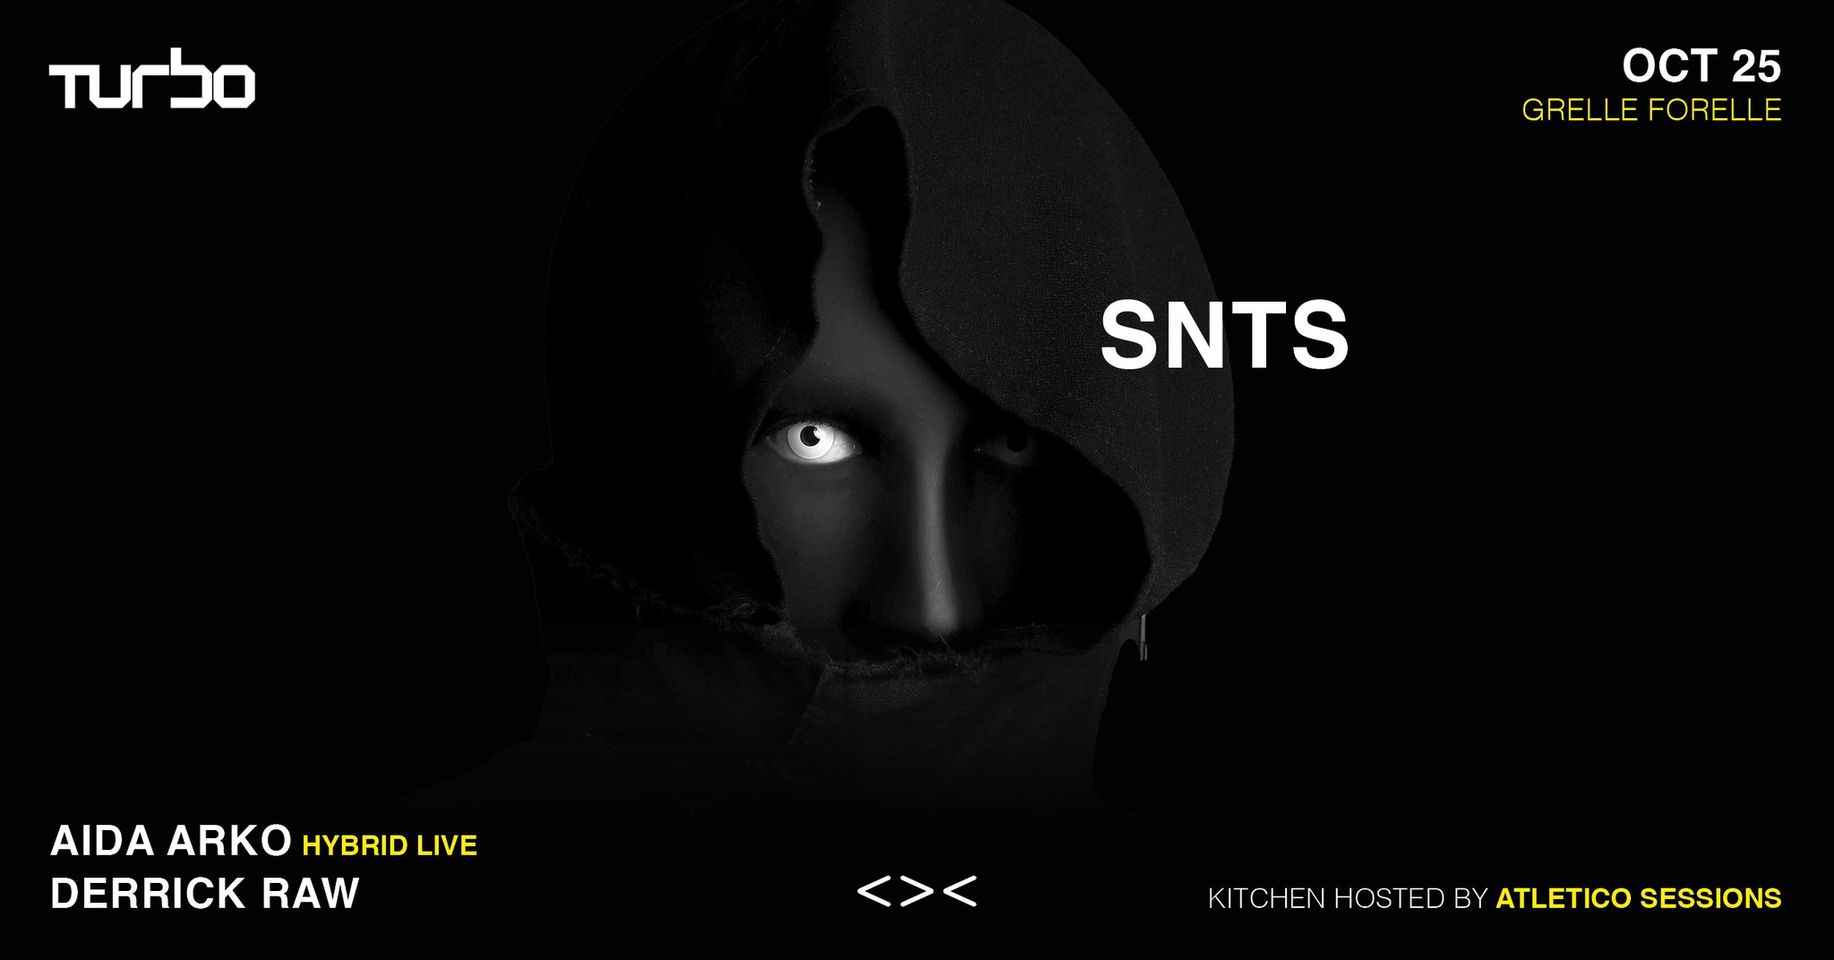 SNTS | TURBO am 25. October 2023 @ Grelle Forelle.